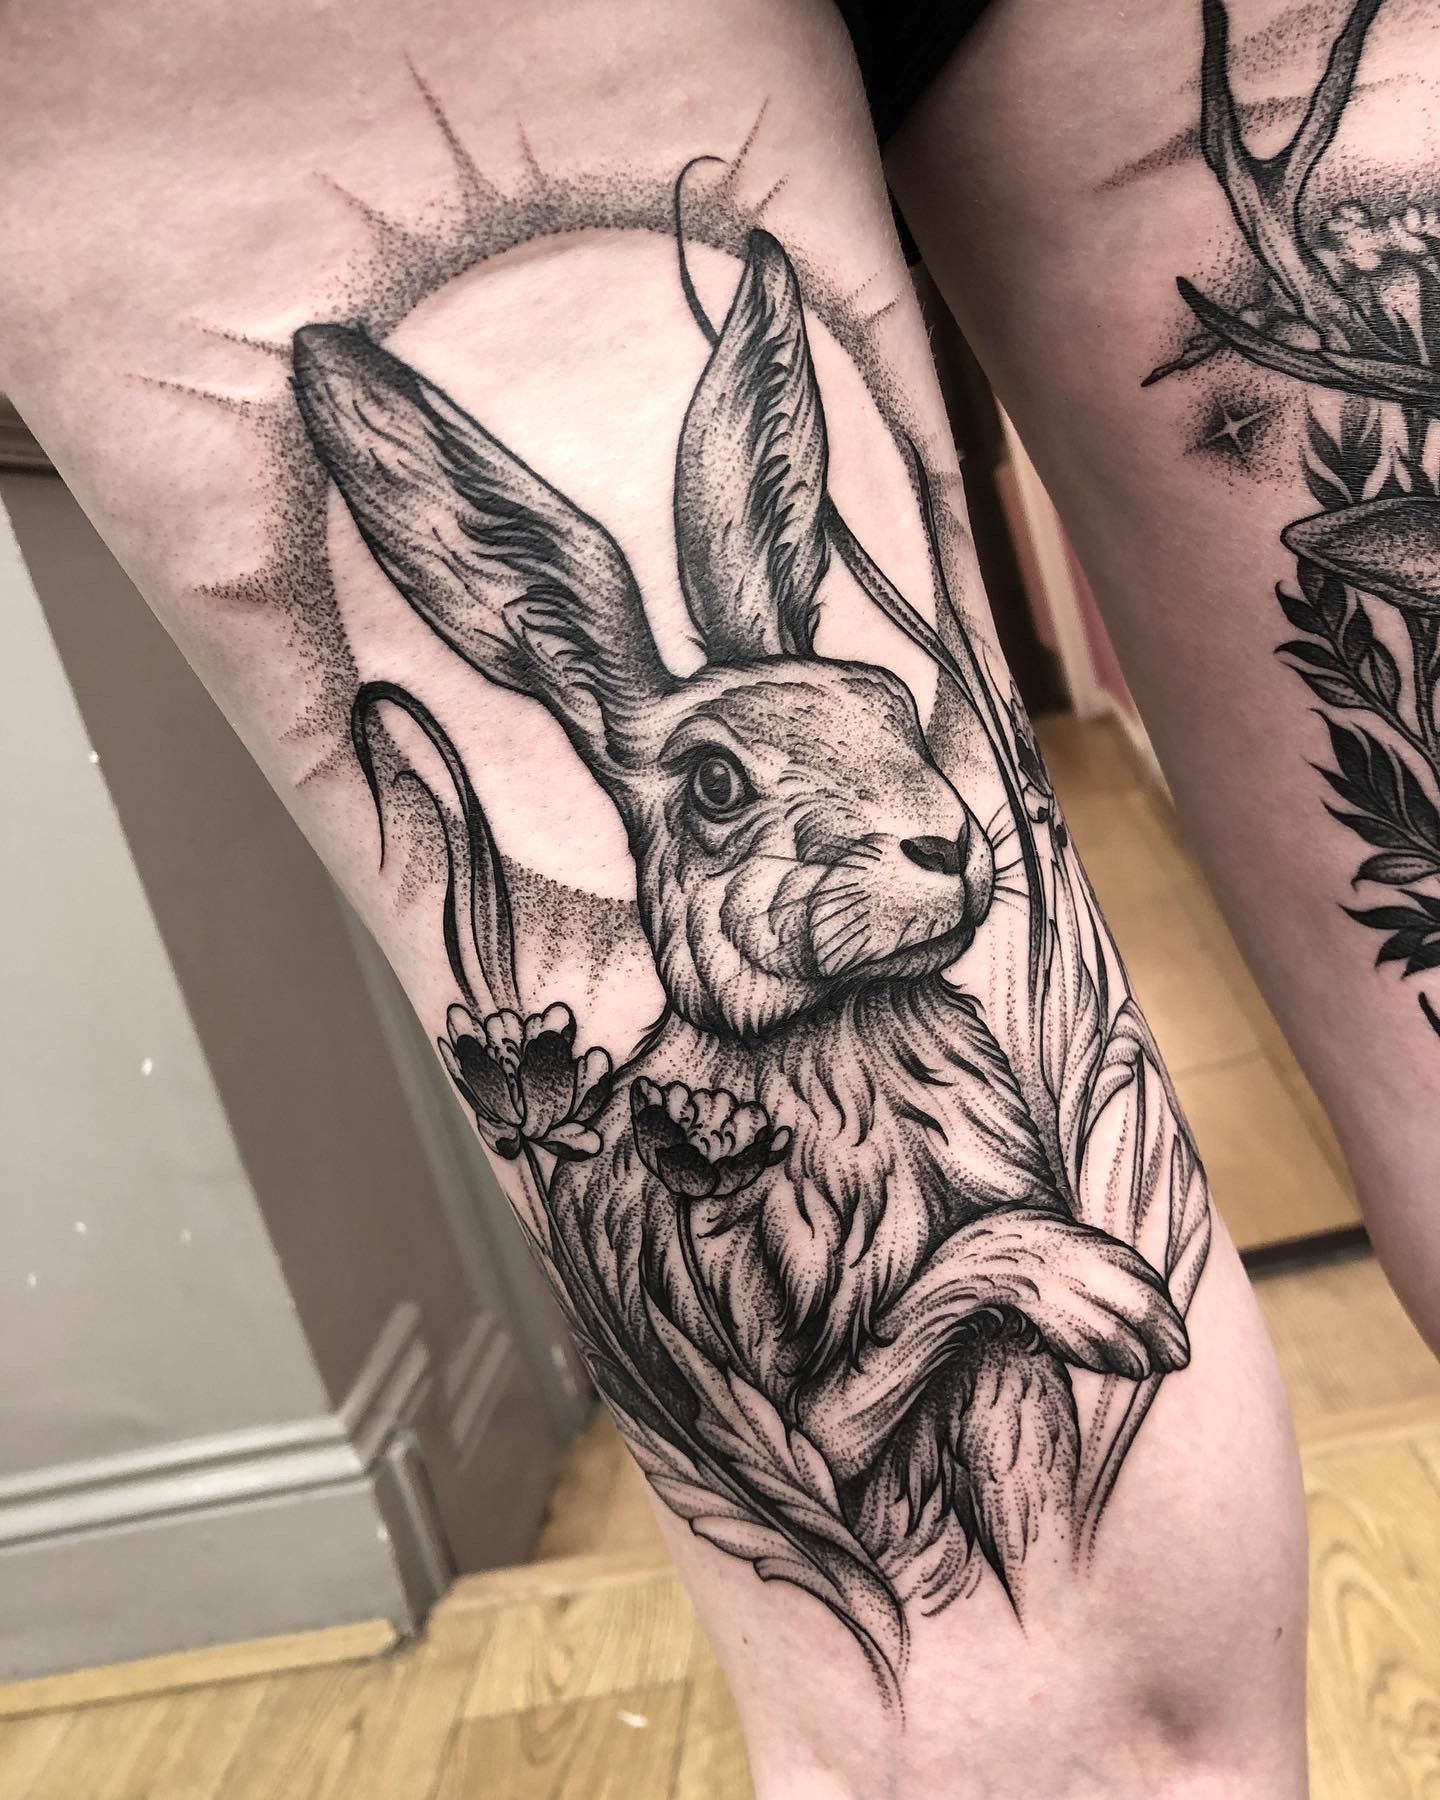 Sketch work white rabbit tattoo done on the inner